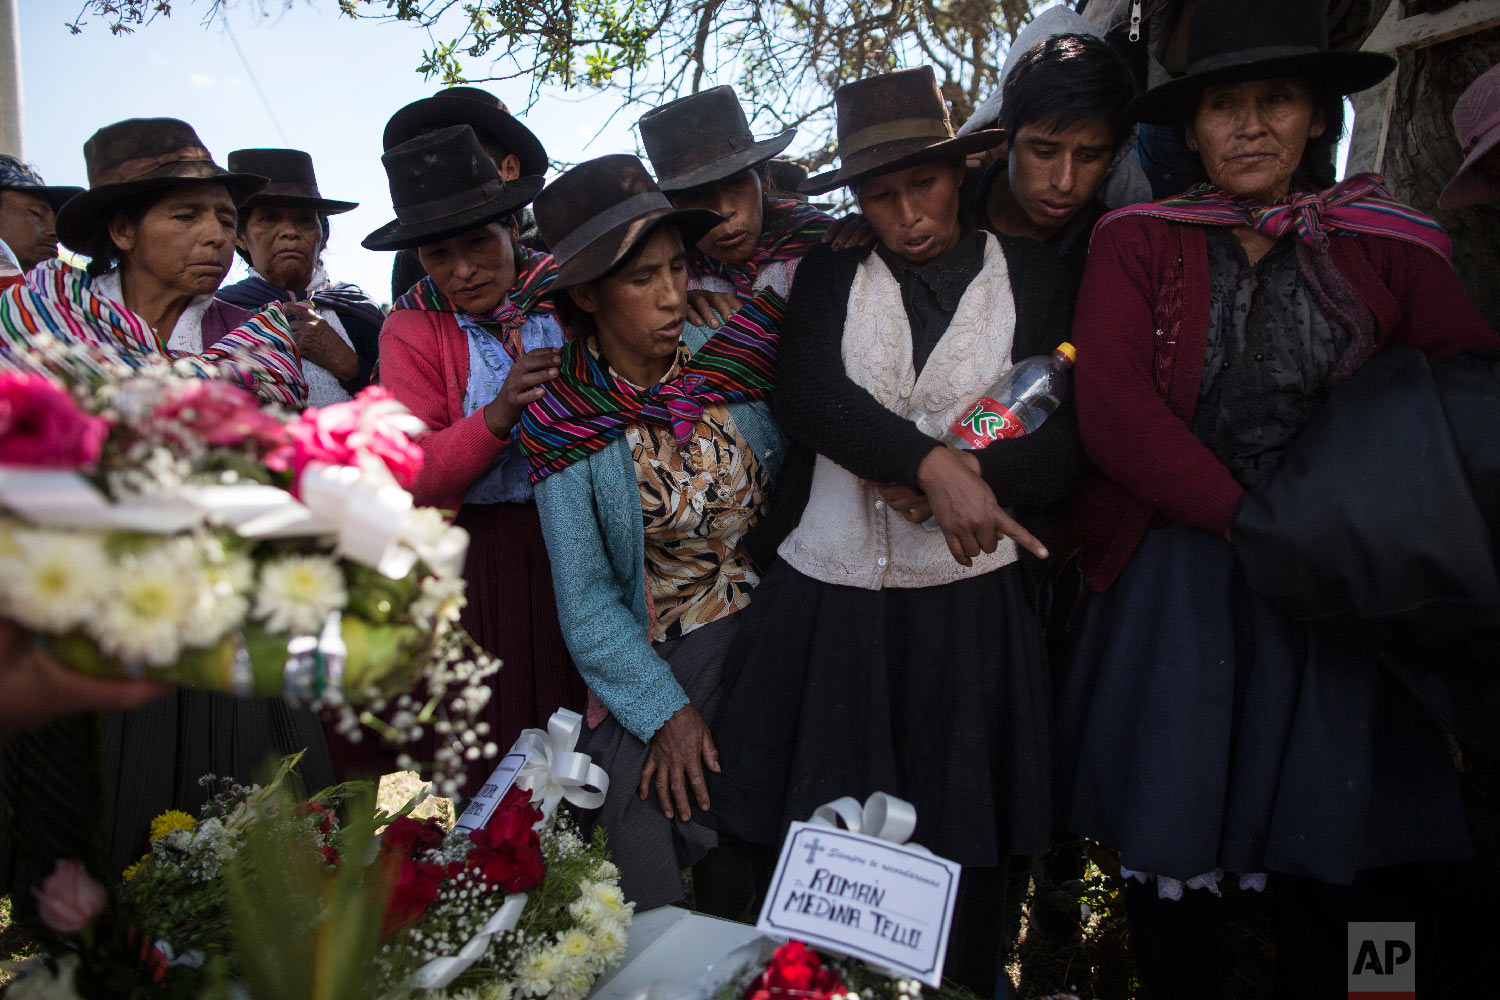  In this Aug. 15, 2018 photo, the relatives of people killed by Shining Path guerrillas and the Peruvian army in the 1980s look at the remains of their loved ones before their burial at the cemetery in Quinuas, in Peru's Ayacucho province. (AP Photo/